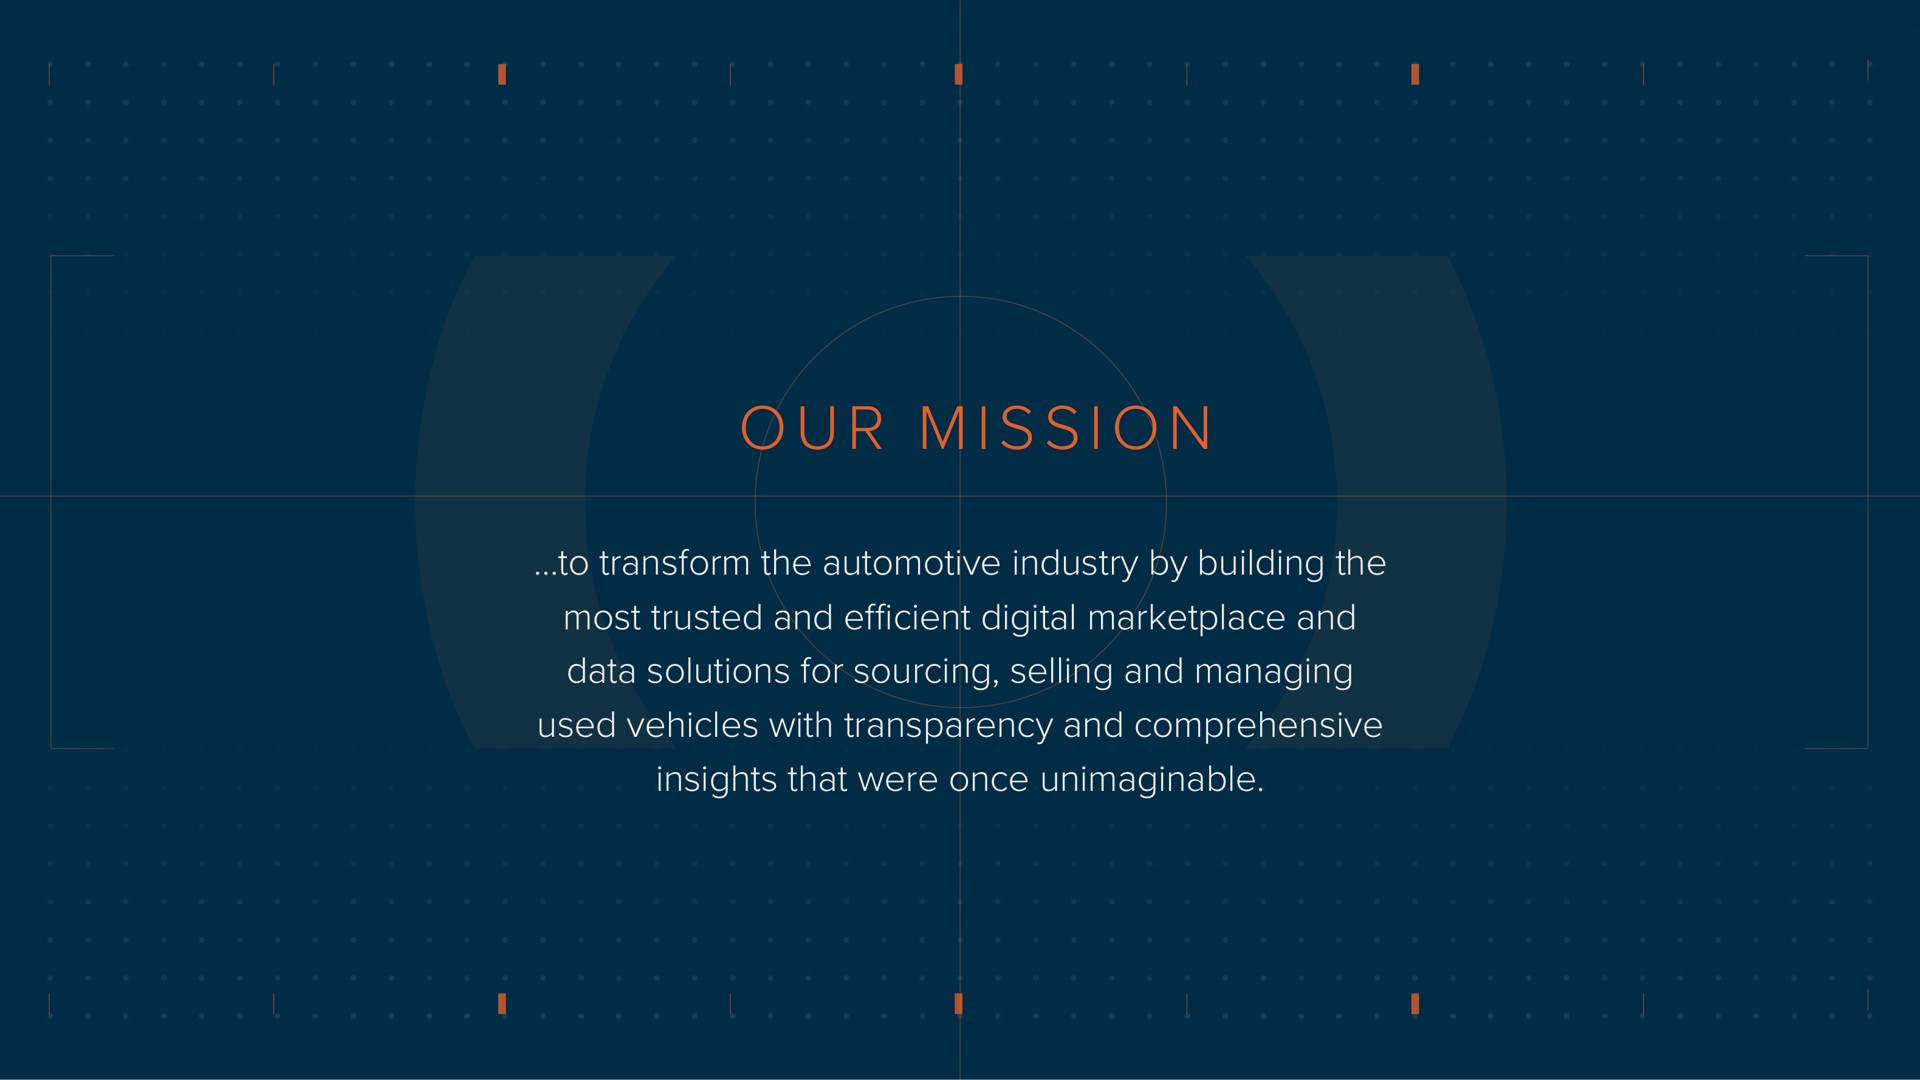 i i our mission to transform the automotive industry by building the most trusted and efficient digital and data solutions for sourcing selling and managing used vehicles with transparency and comprehensive insights that were once unimaginable | ACV Auctions